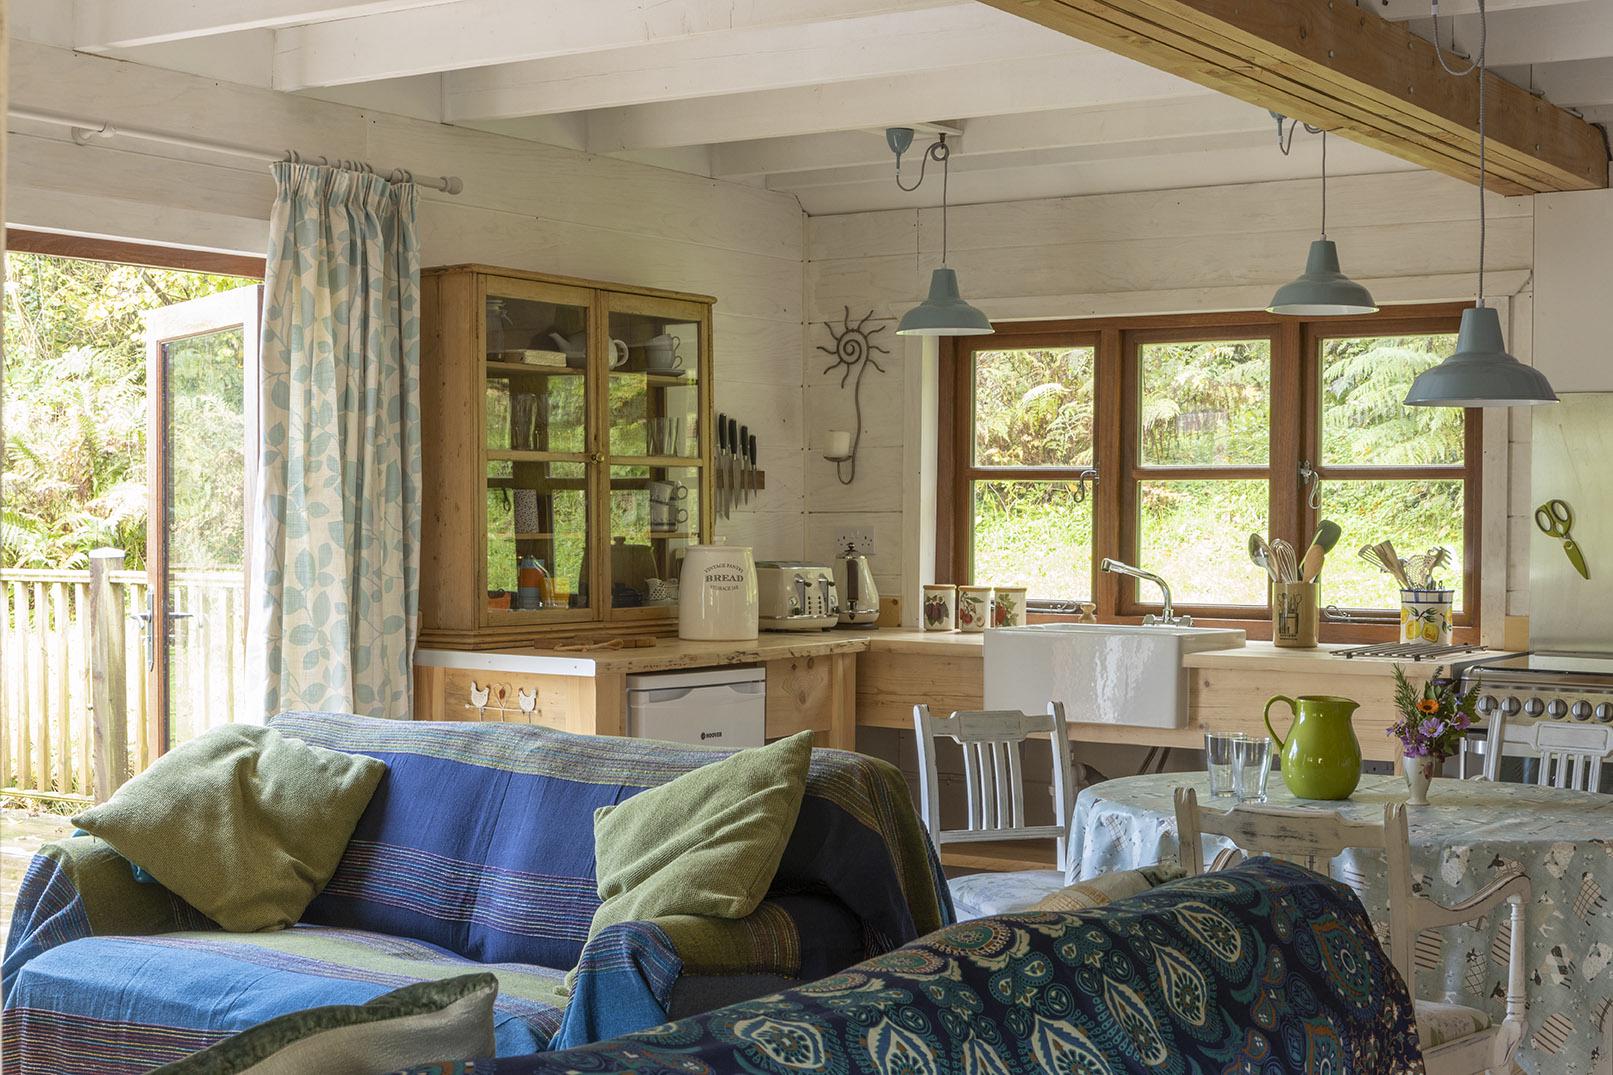 Self-Catering in Dorset holidays at Cool Places